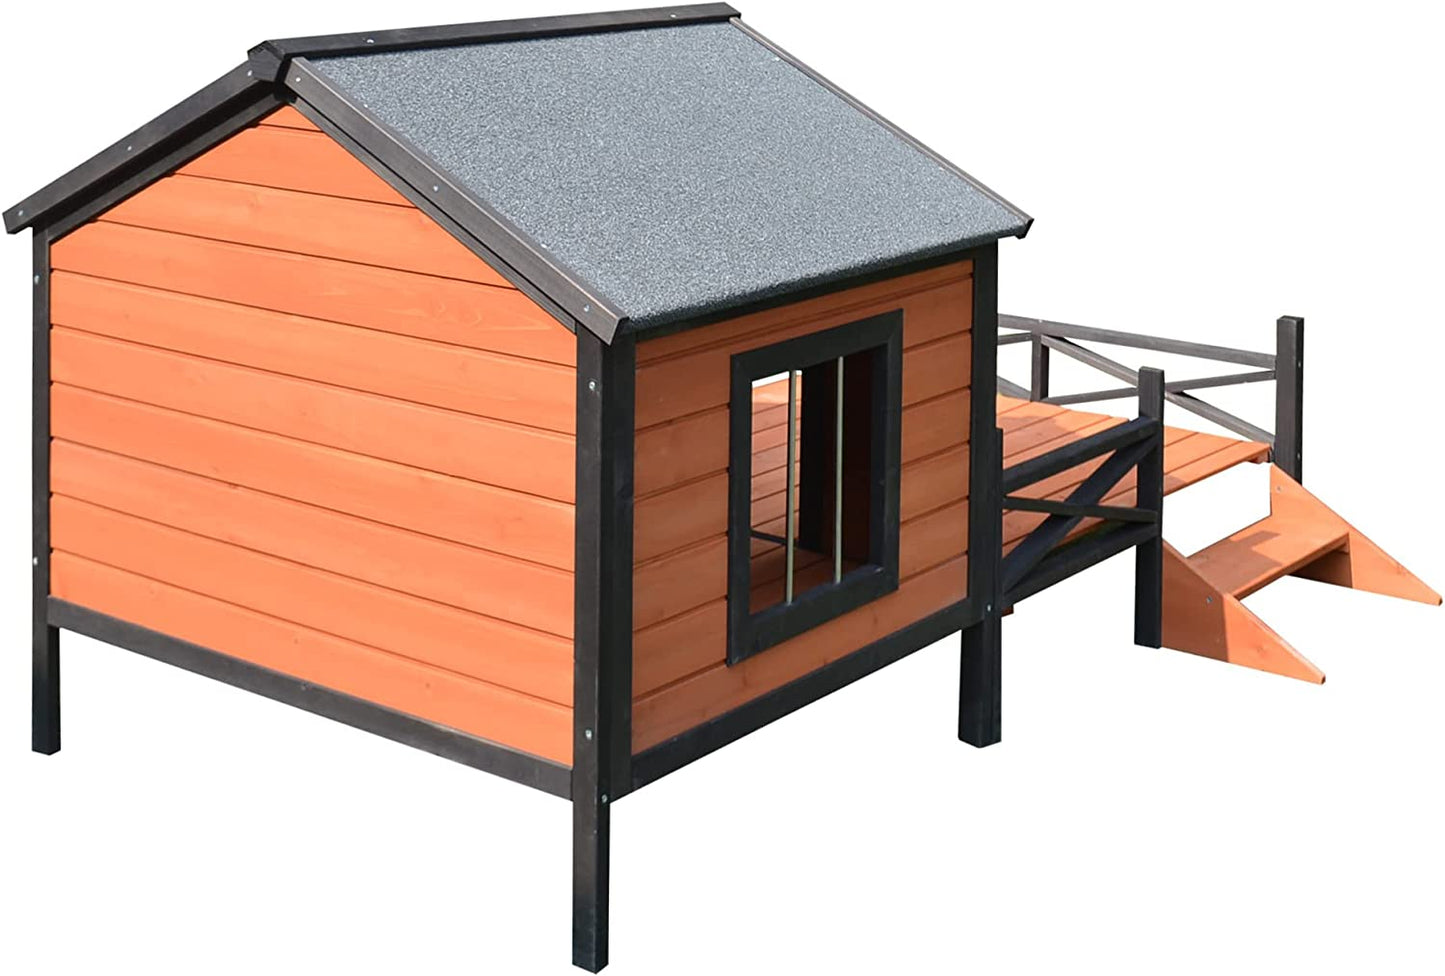 Large Dog House/Porch Expansive Size, XL Wooden Elevated Dog Shelter, 67" The Pimp Your Pets Store